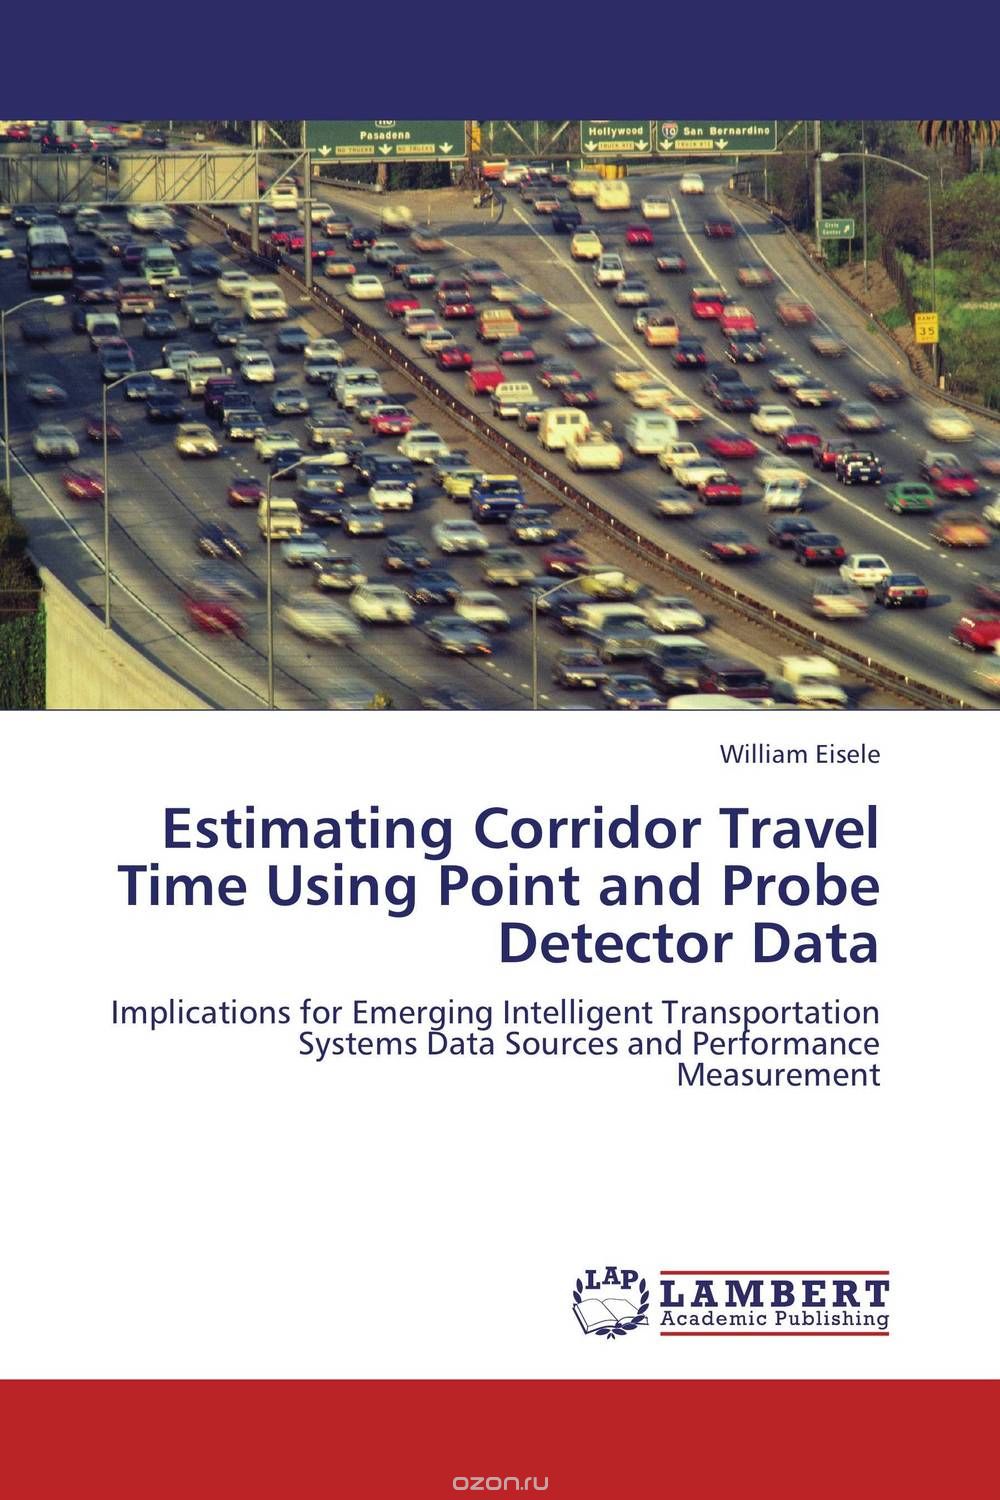 Estimating Corridor Travel Time Using Point and Probe Detector Data